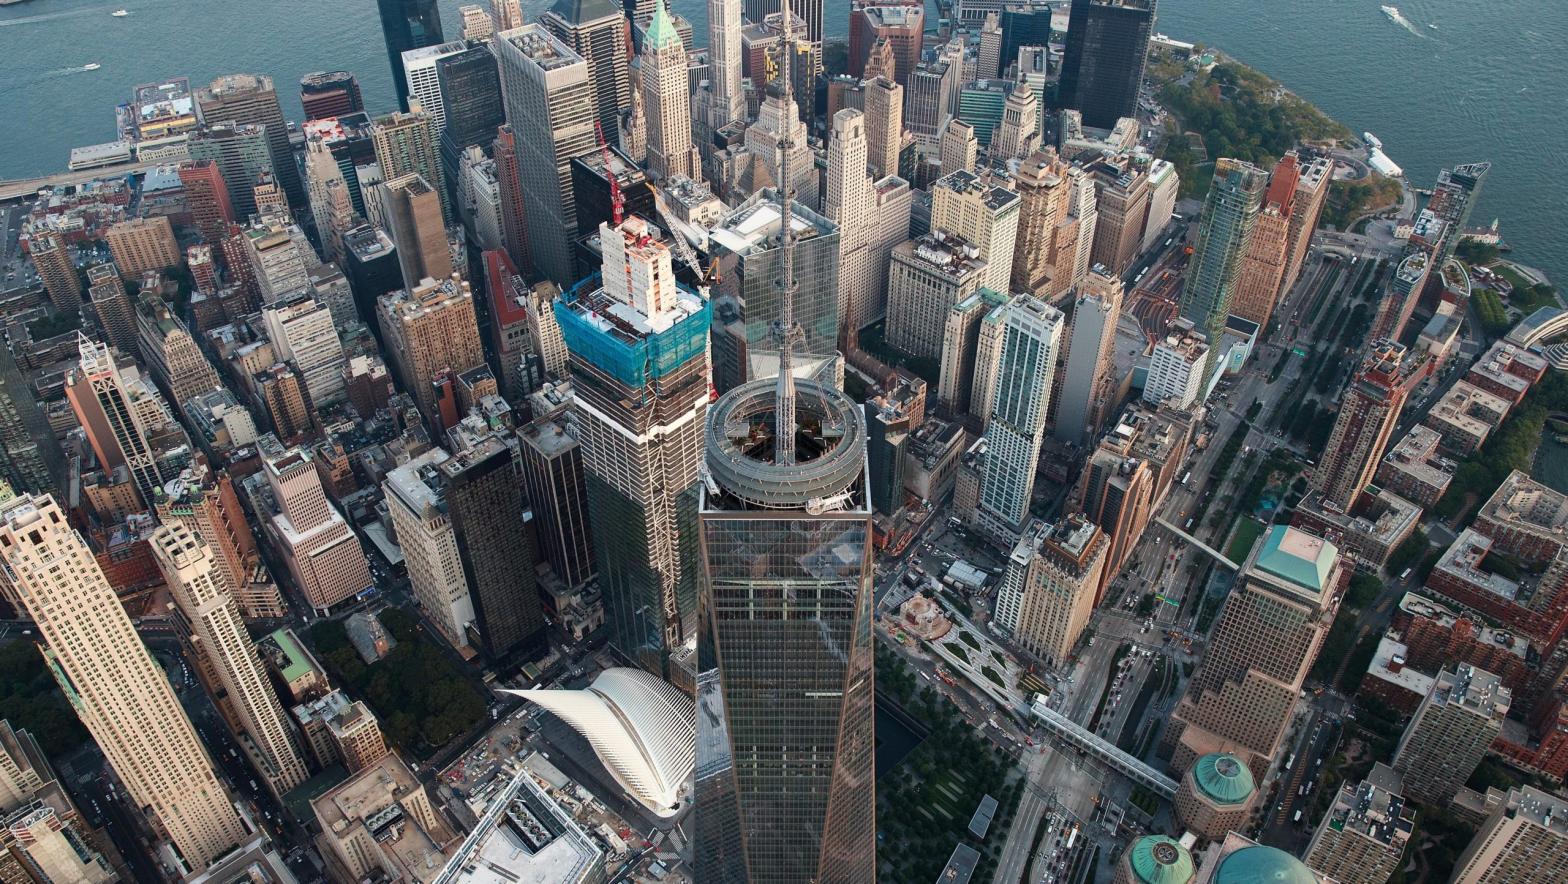 An aerial view One World Trade Centre in Lower Manhattan. (Photo: Drew Angerer, Getty Images)